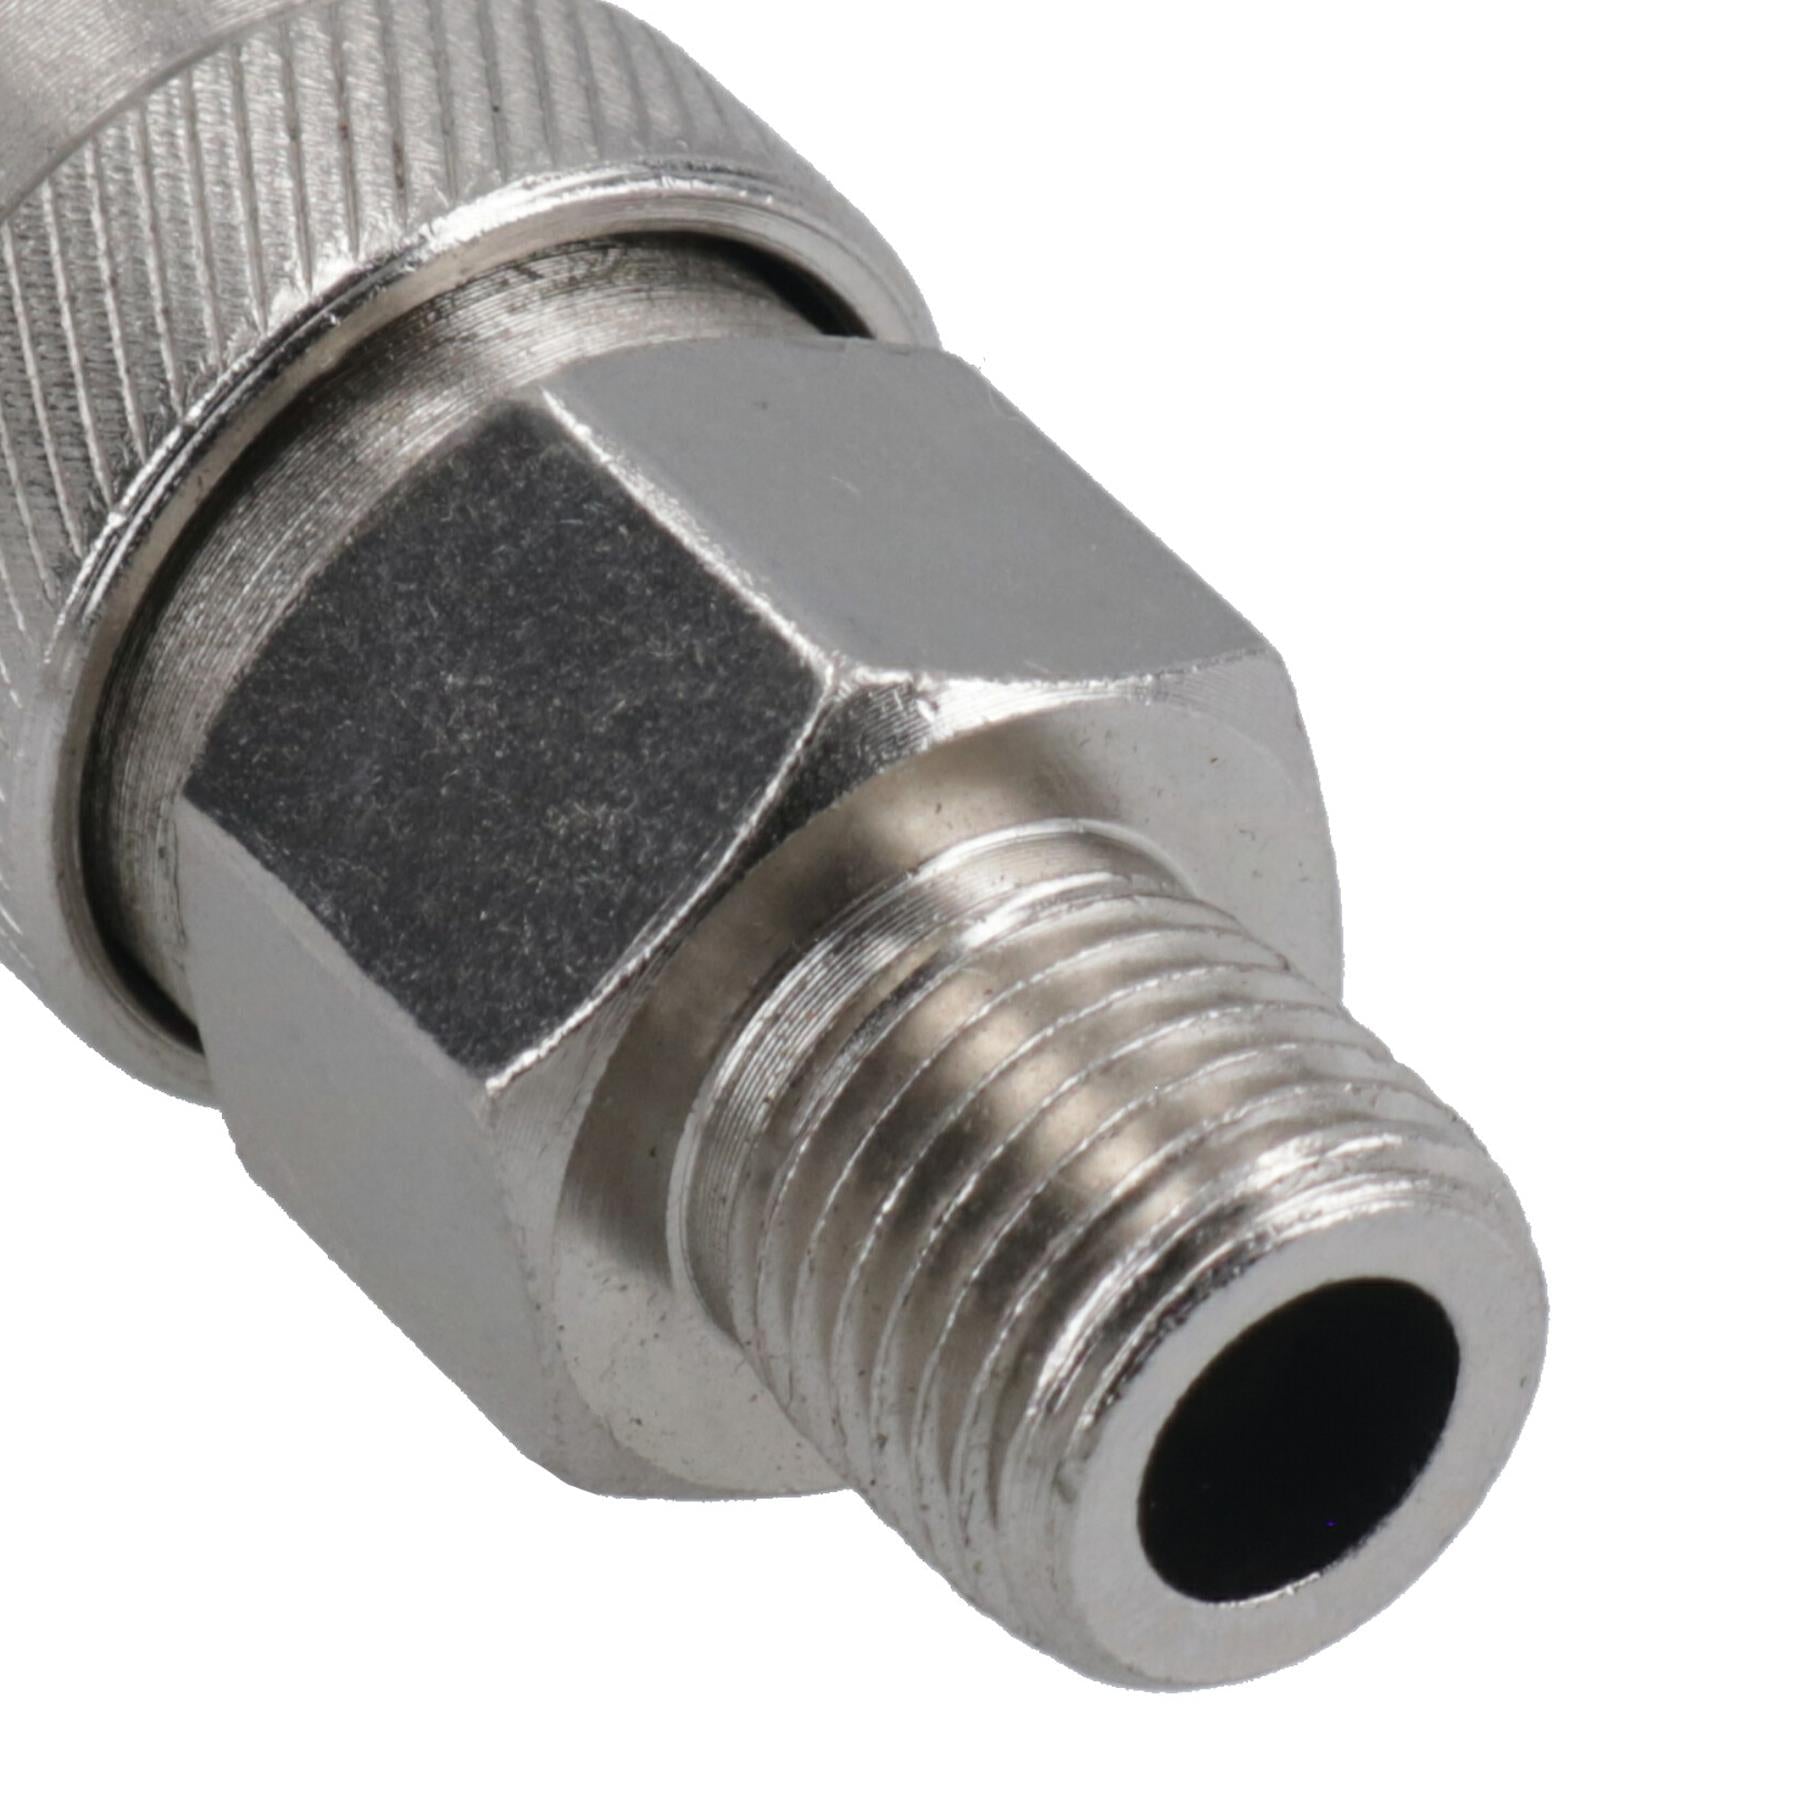 Euro Air Line Quick Release Hose Coupler Connector 1/4 BSP Male Thread